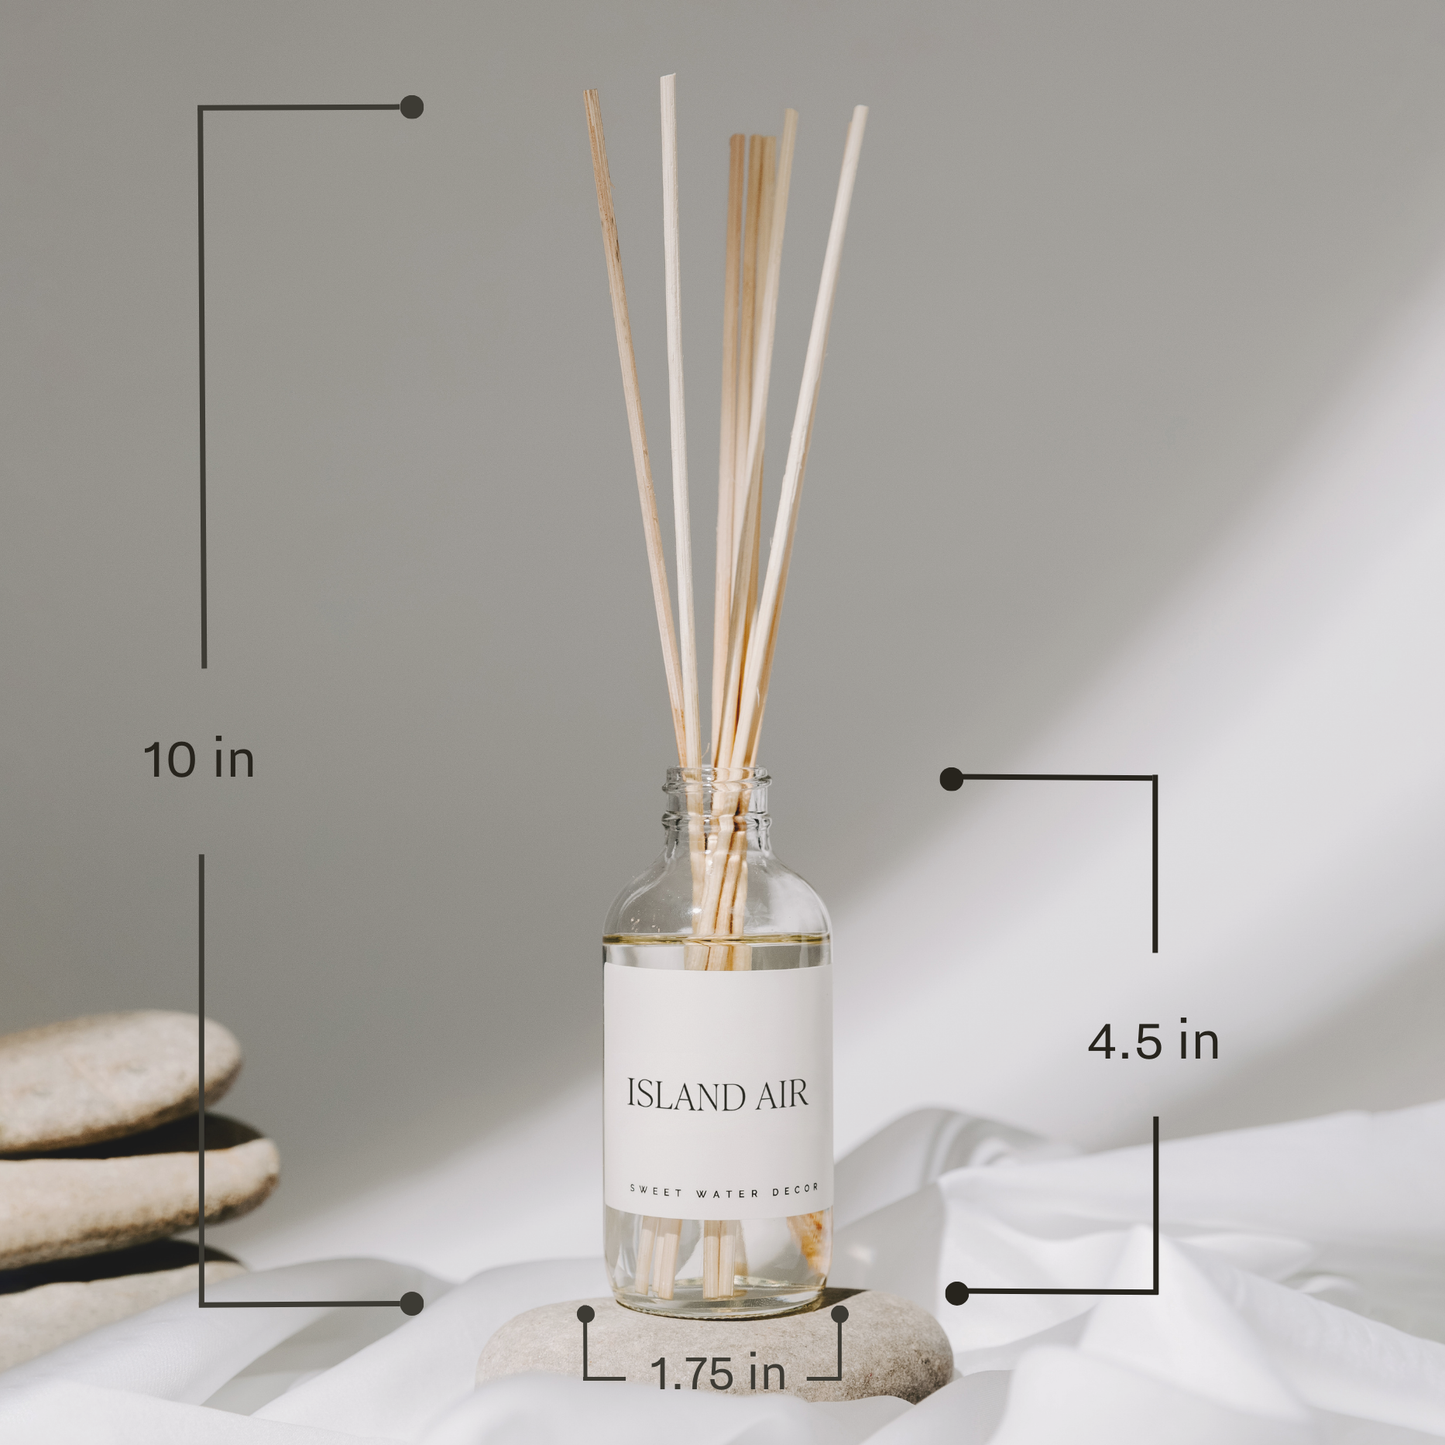 Sweet Water Decor - Weekend Reed Diffuser - Gifts & Home Decor